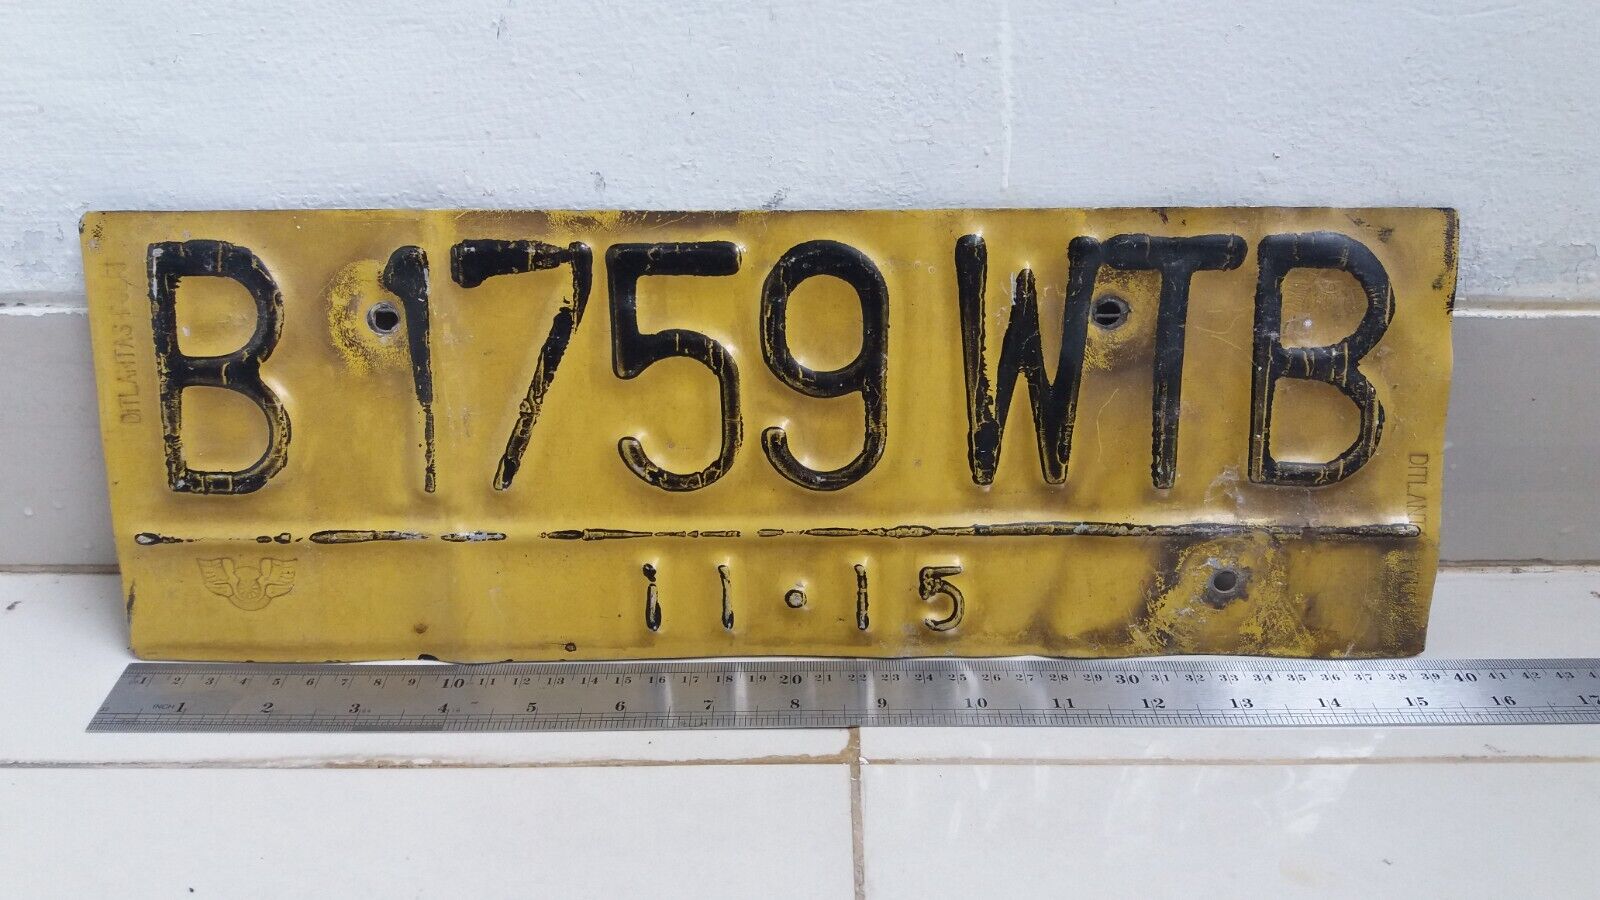 1 Pc Used Original Collectible License Car Plate B 1759 WTB Indonesia 2015